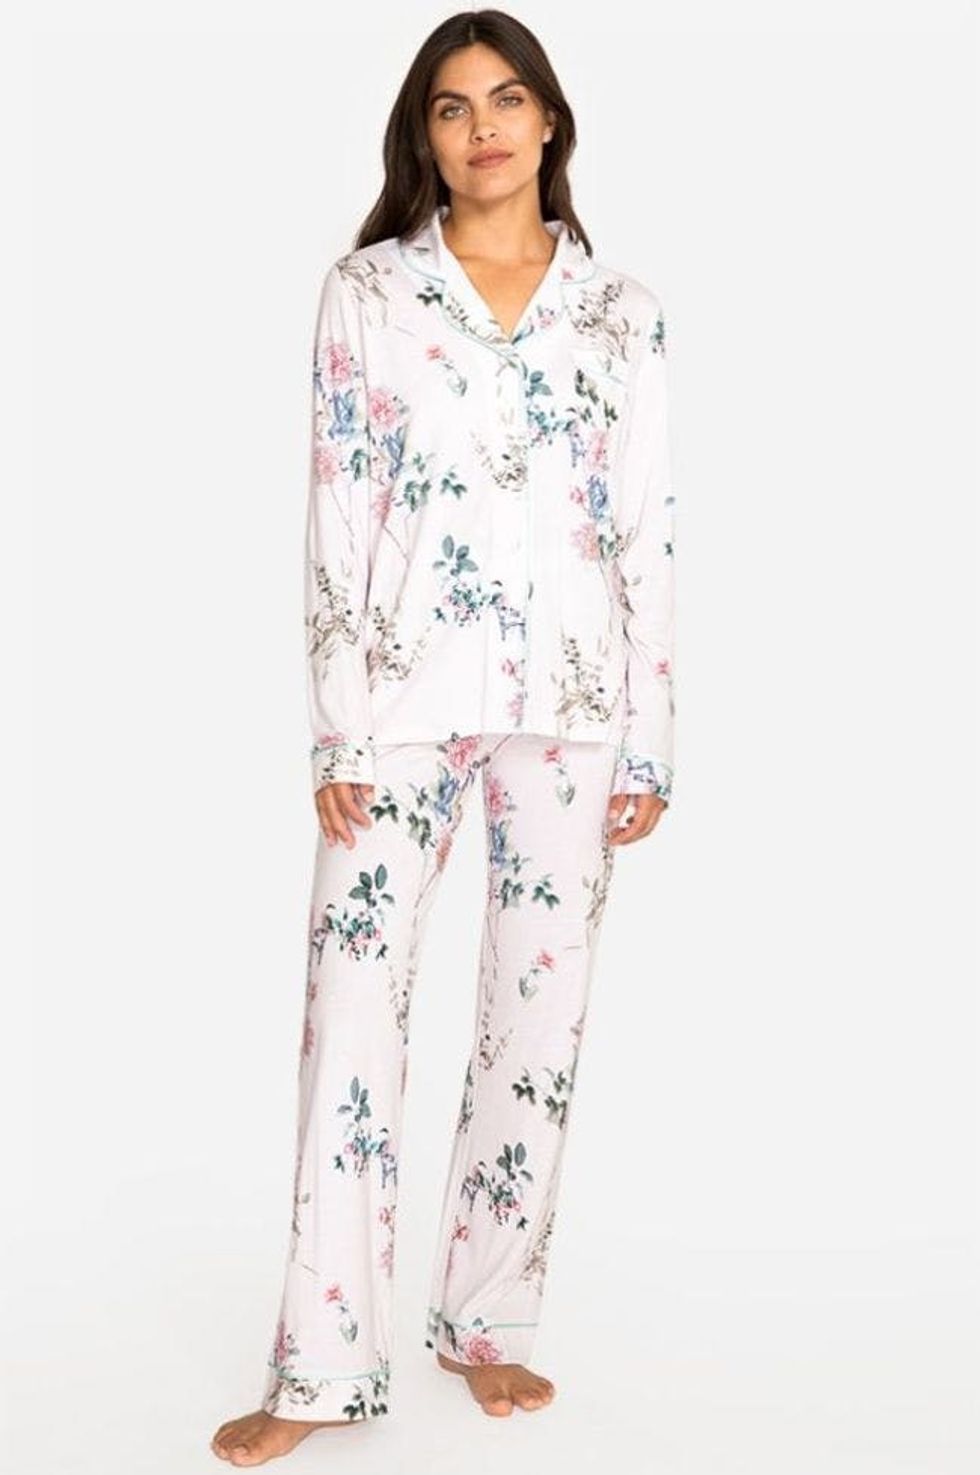 All the Coziest Loungewear Looks to Cuddle Up in This Winter - Brit + Co